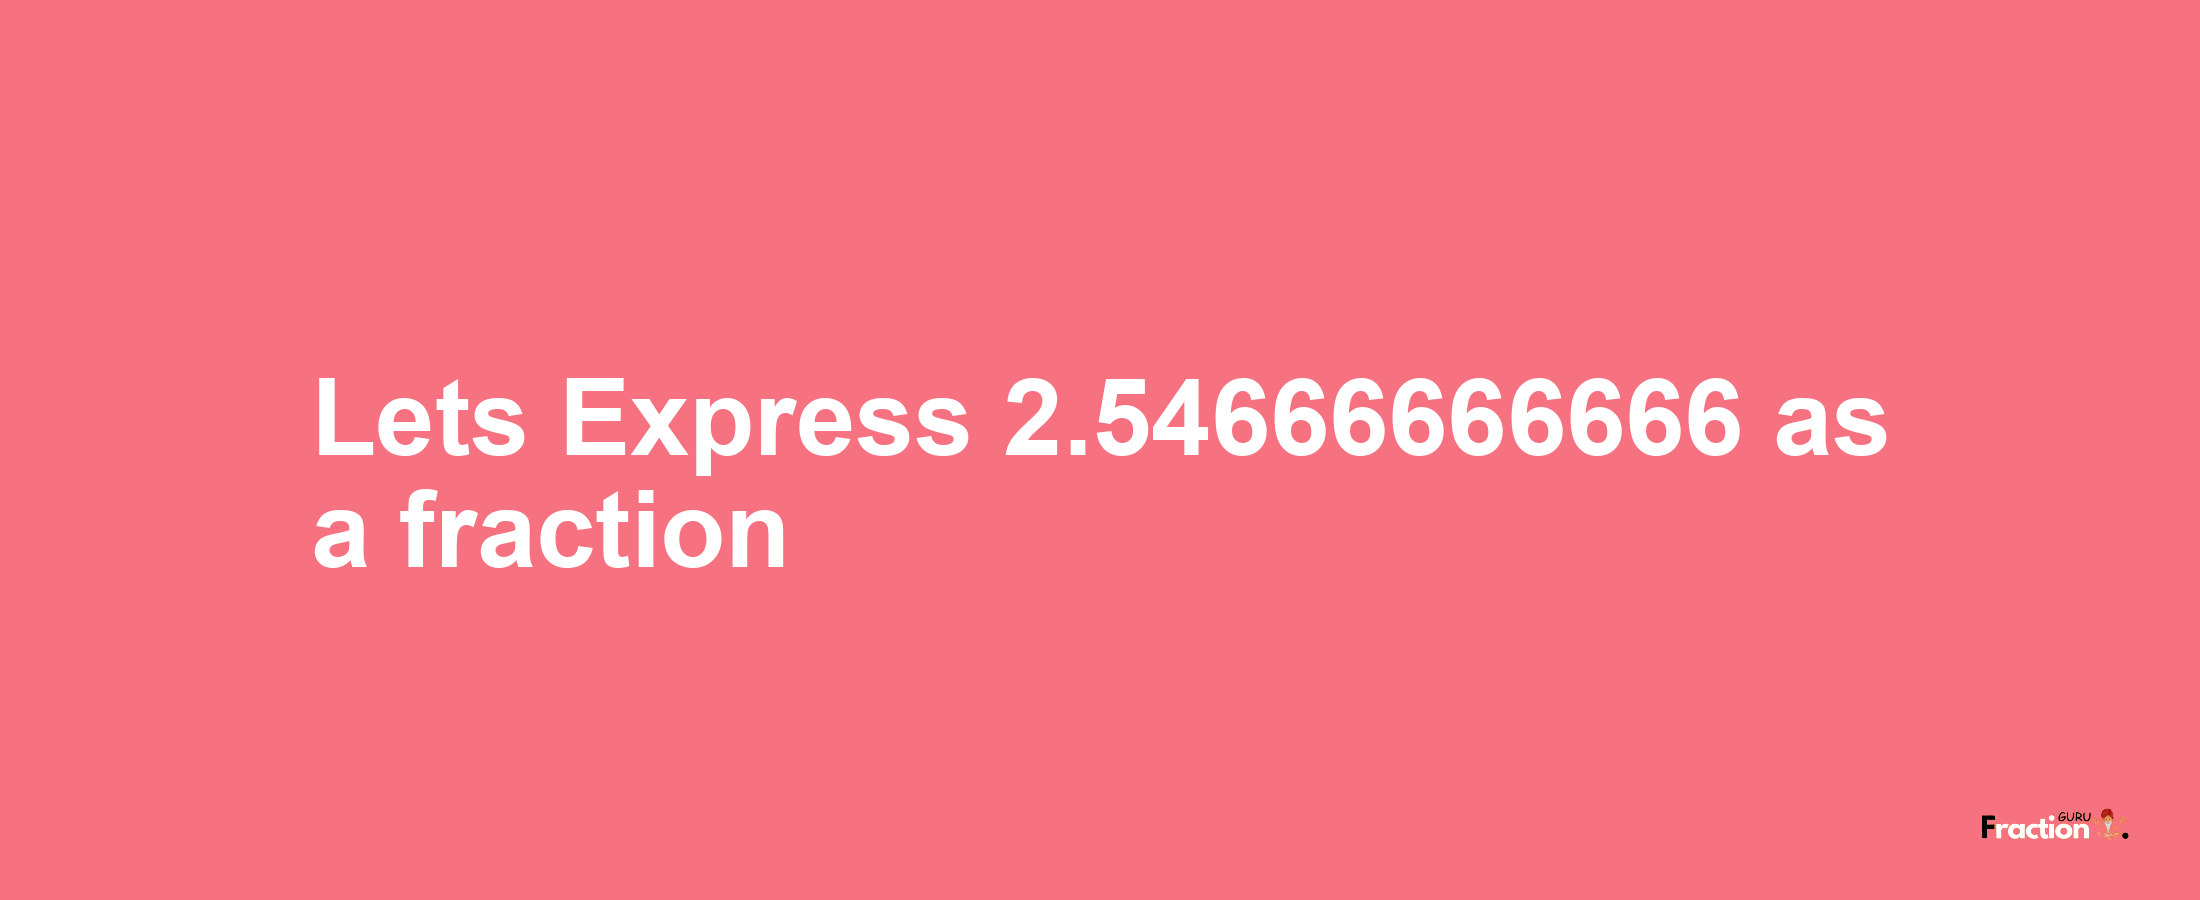 Lets Express 2.54666666666 as afraction